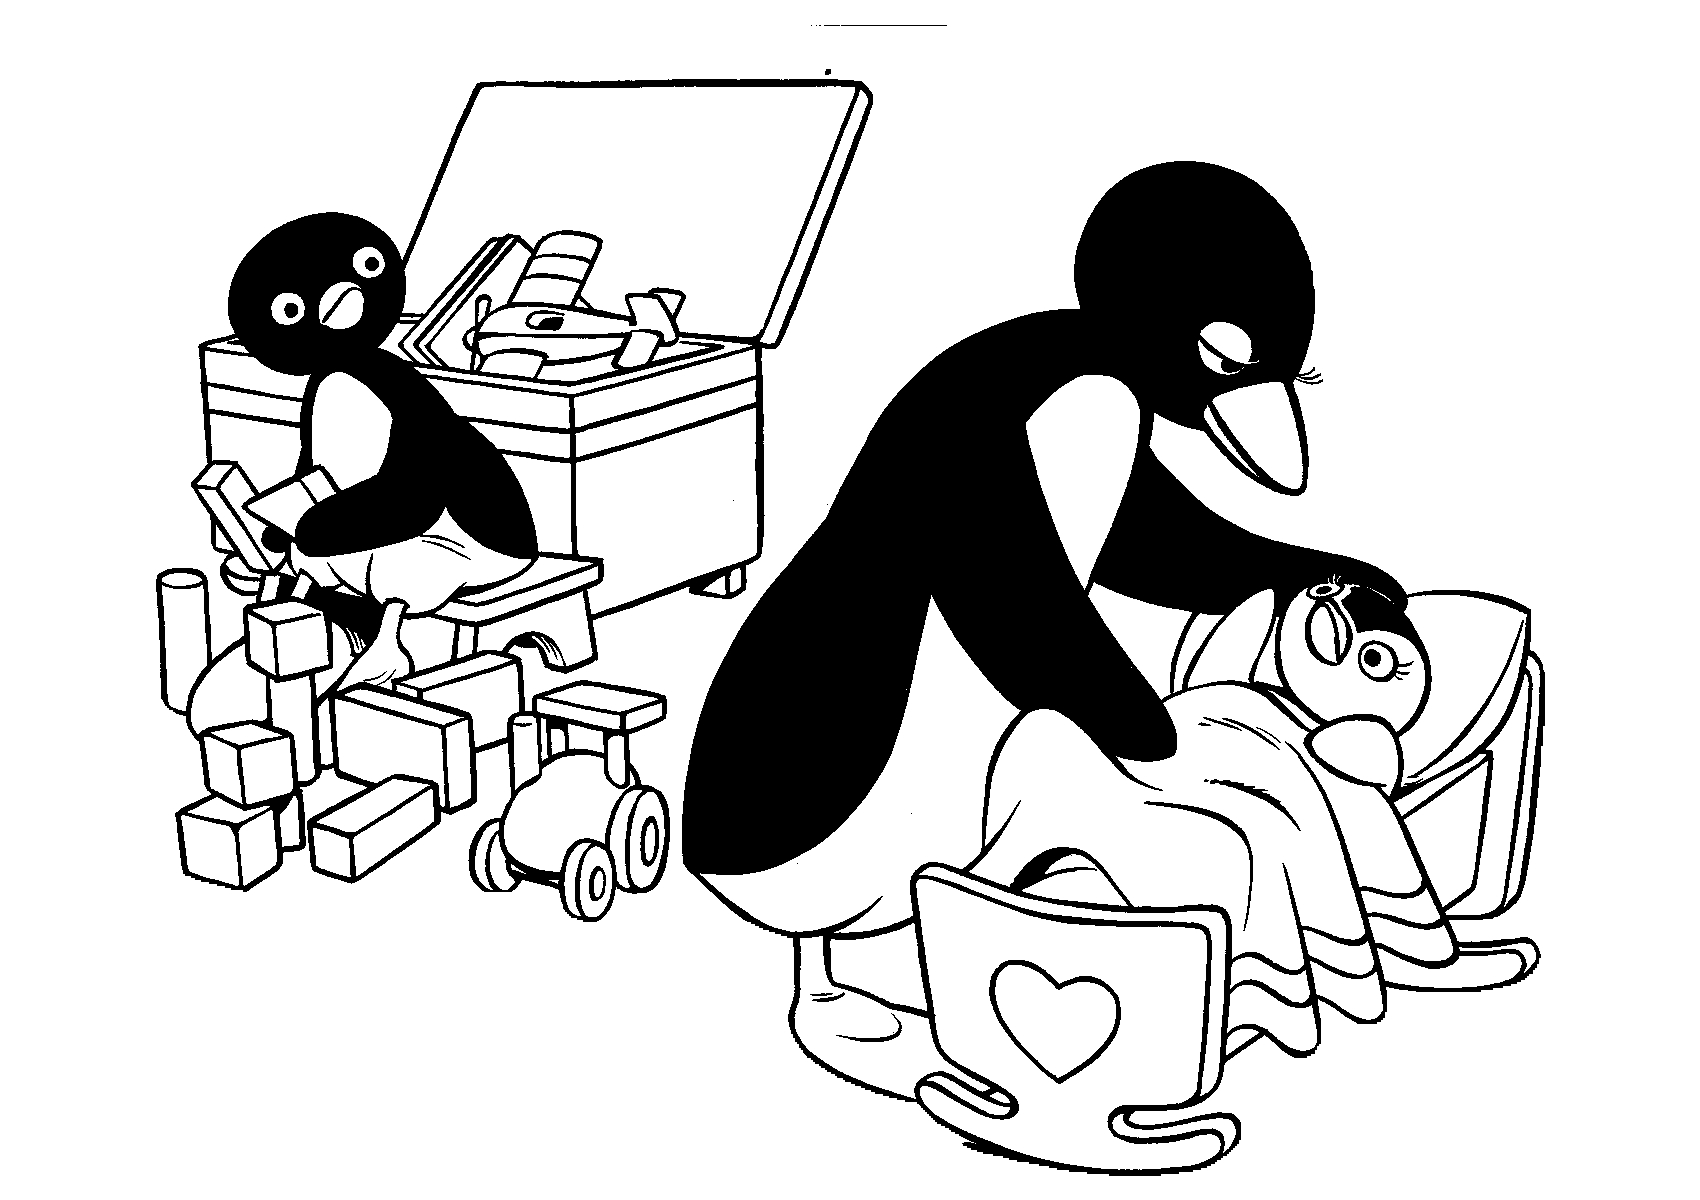 Drawing 10 from Pingu coloring page to print and coloring